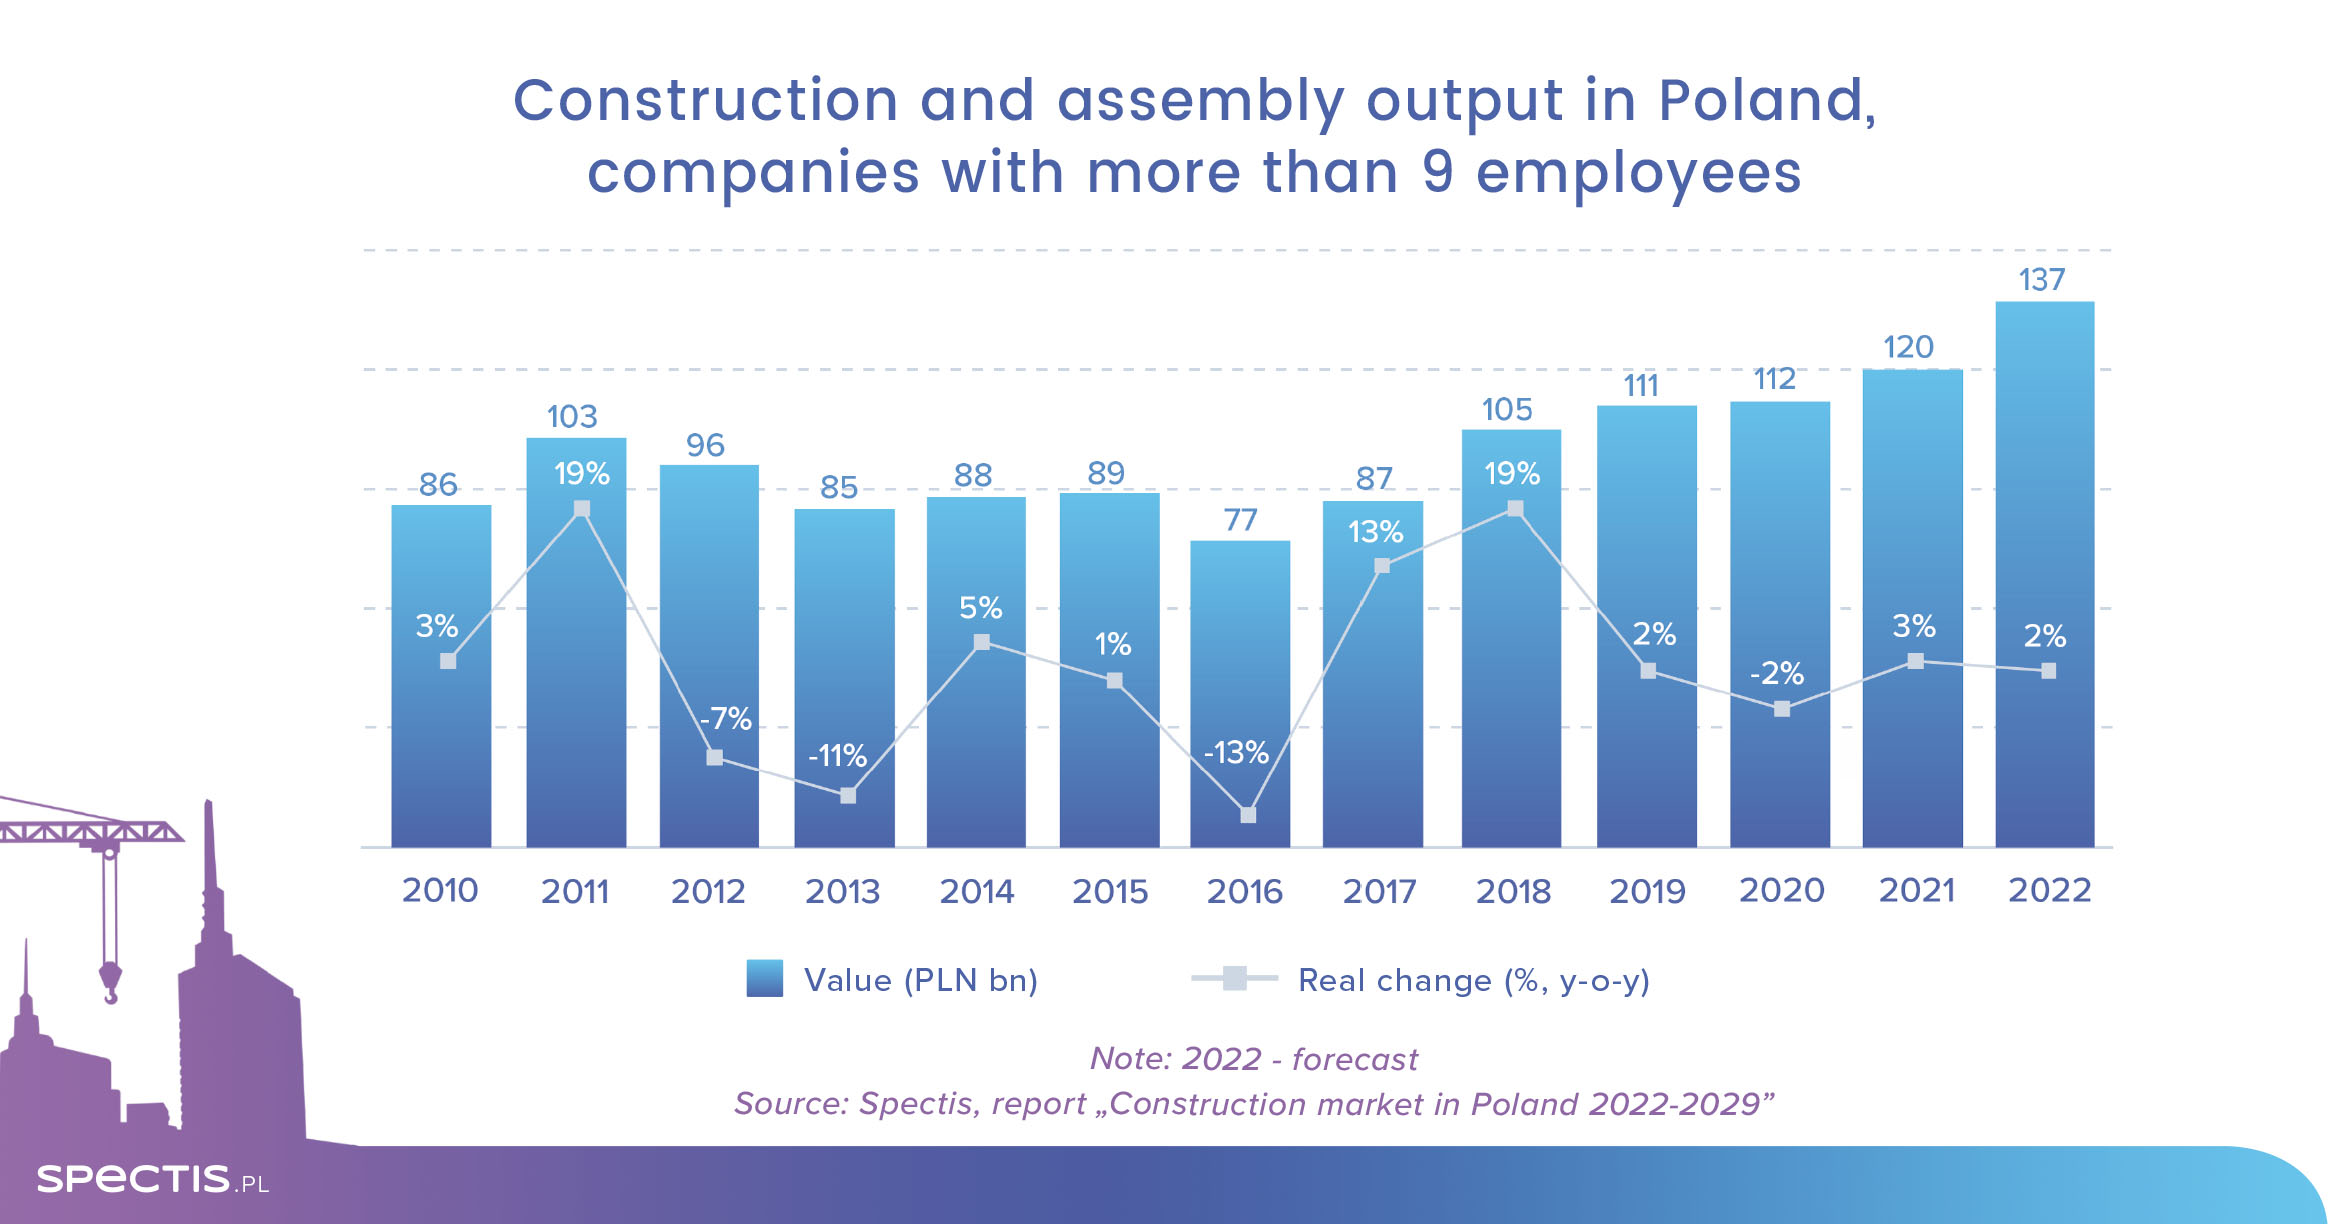 Construction market poised to grow 2% in 2022